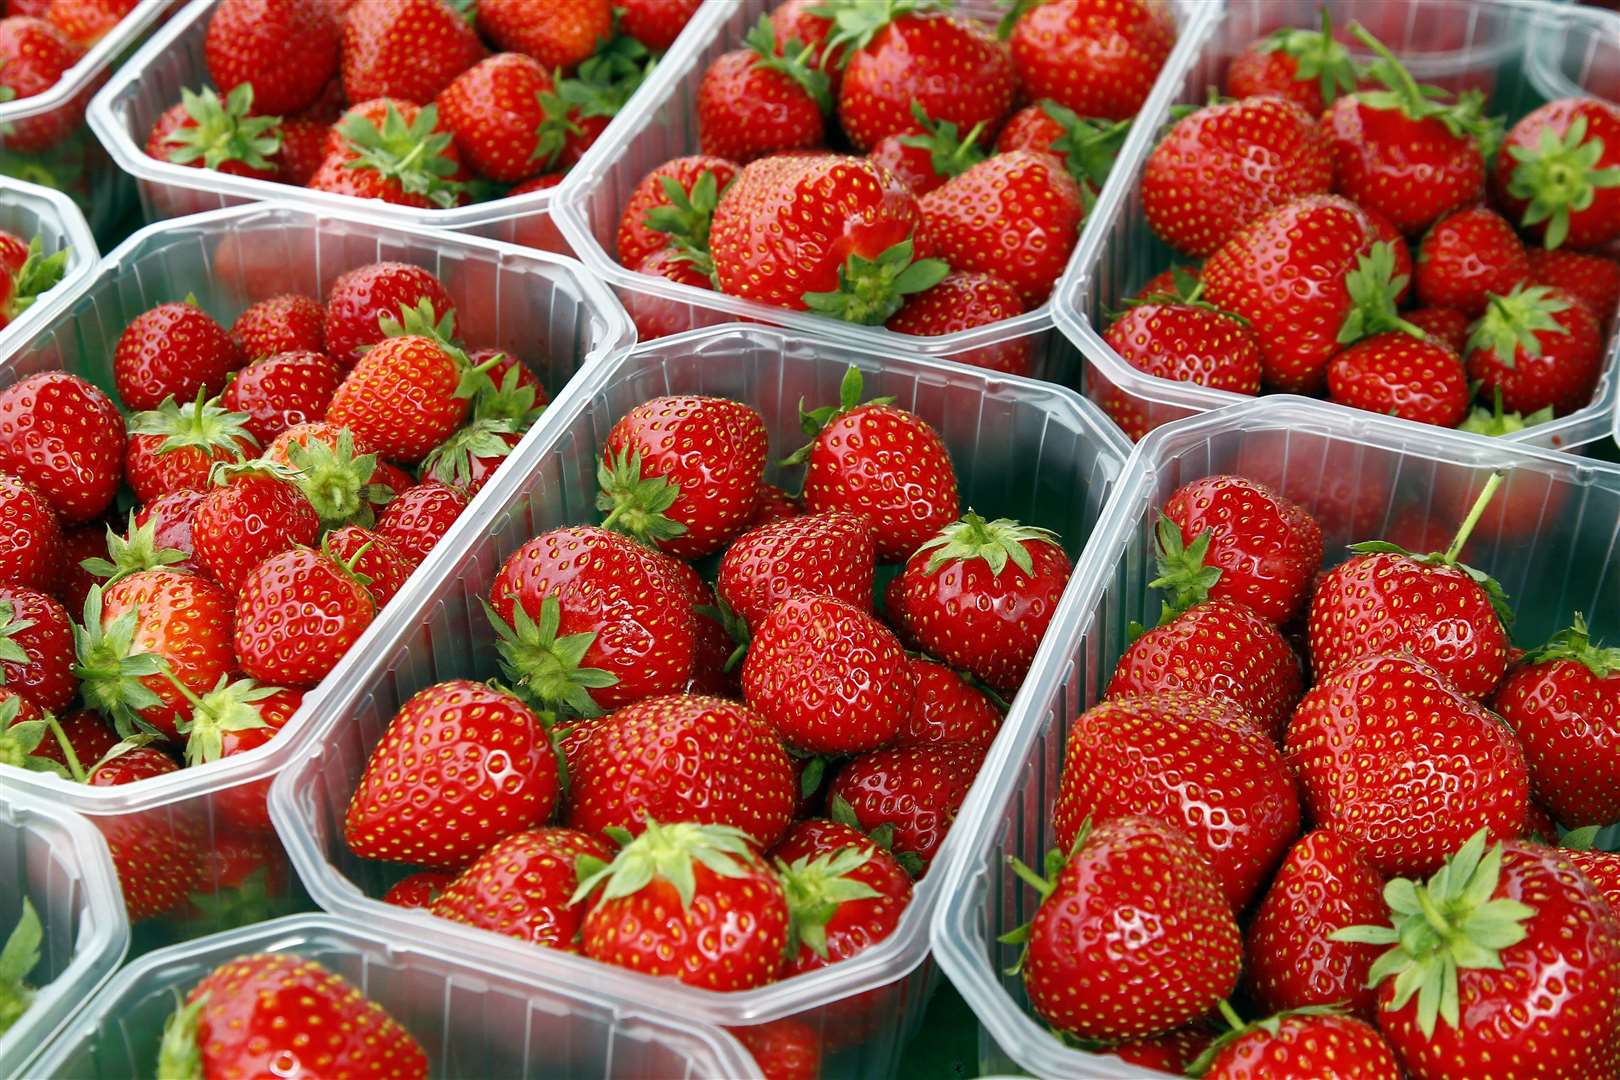 Kentish strawberries will be served at Wimbledon this year Picture: Sean Aidan